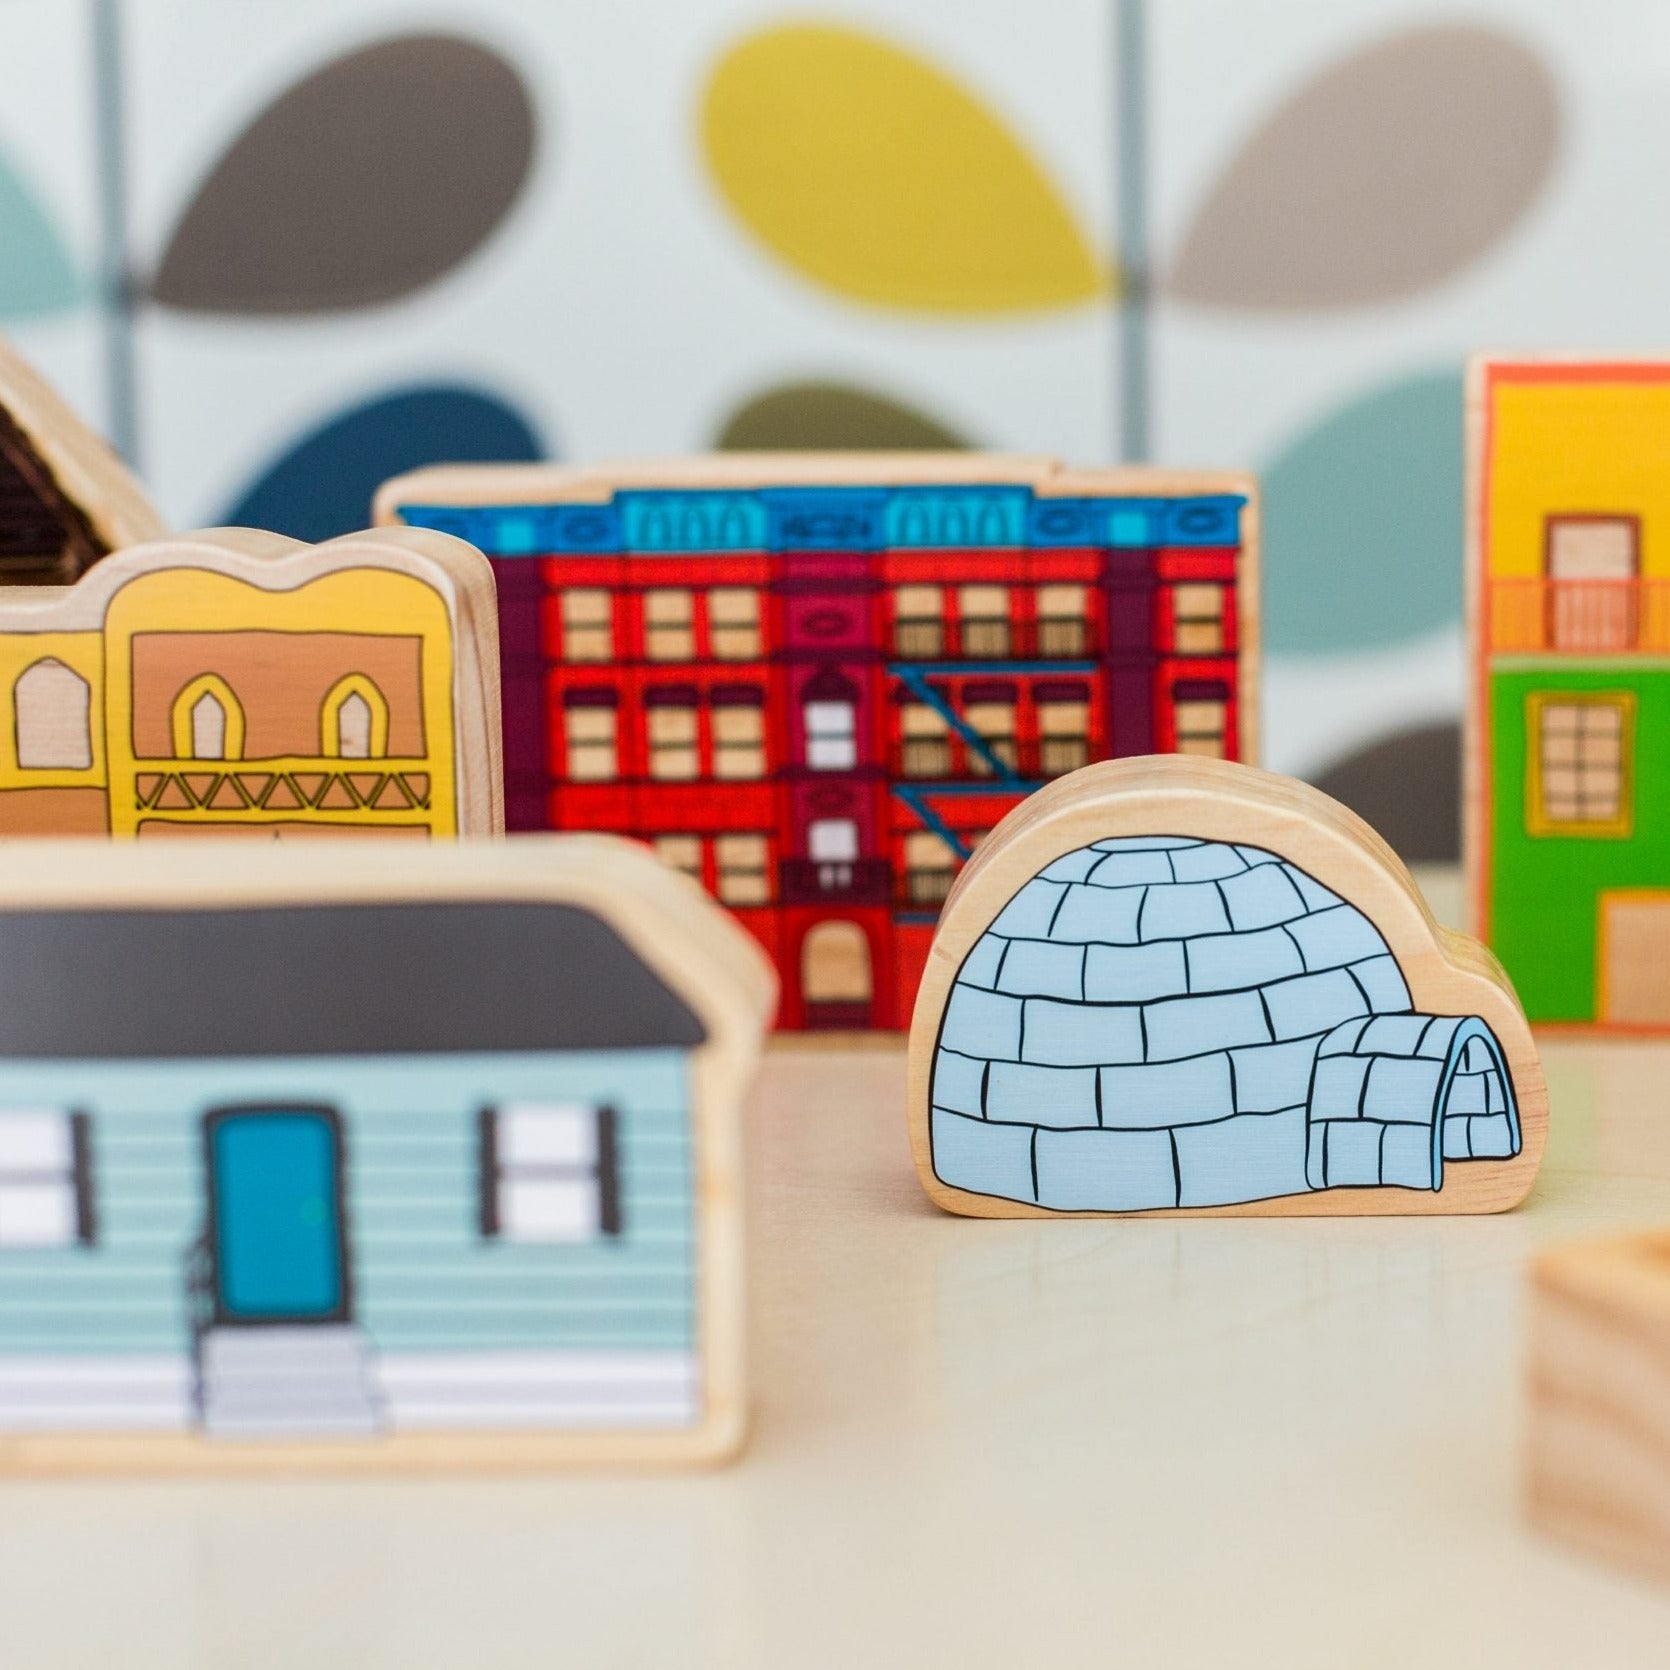 Homes Around the World, Introducing the Freckled Frog Homes around the World wooden block set - a beautifully illustrated and vibrant toy that sparks discussion about inclusion and communities while celebrating the diverse cultures and homes found around the globe. This set includes 15 blocks, each representing a different culture and country, such as Greece, Germany, South America,and China, among others.These wooden blocks are not only visually stunning but also serve as a tool for children's creative pla